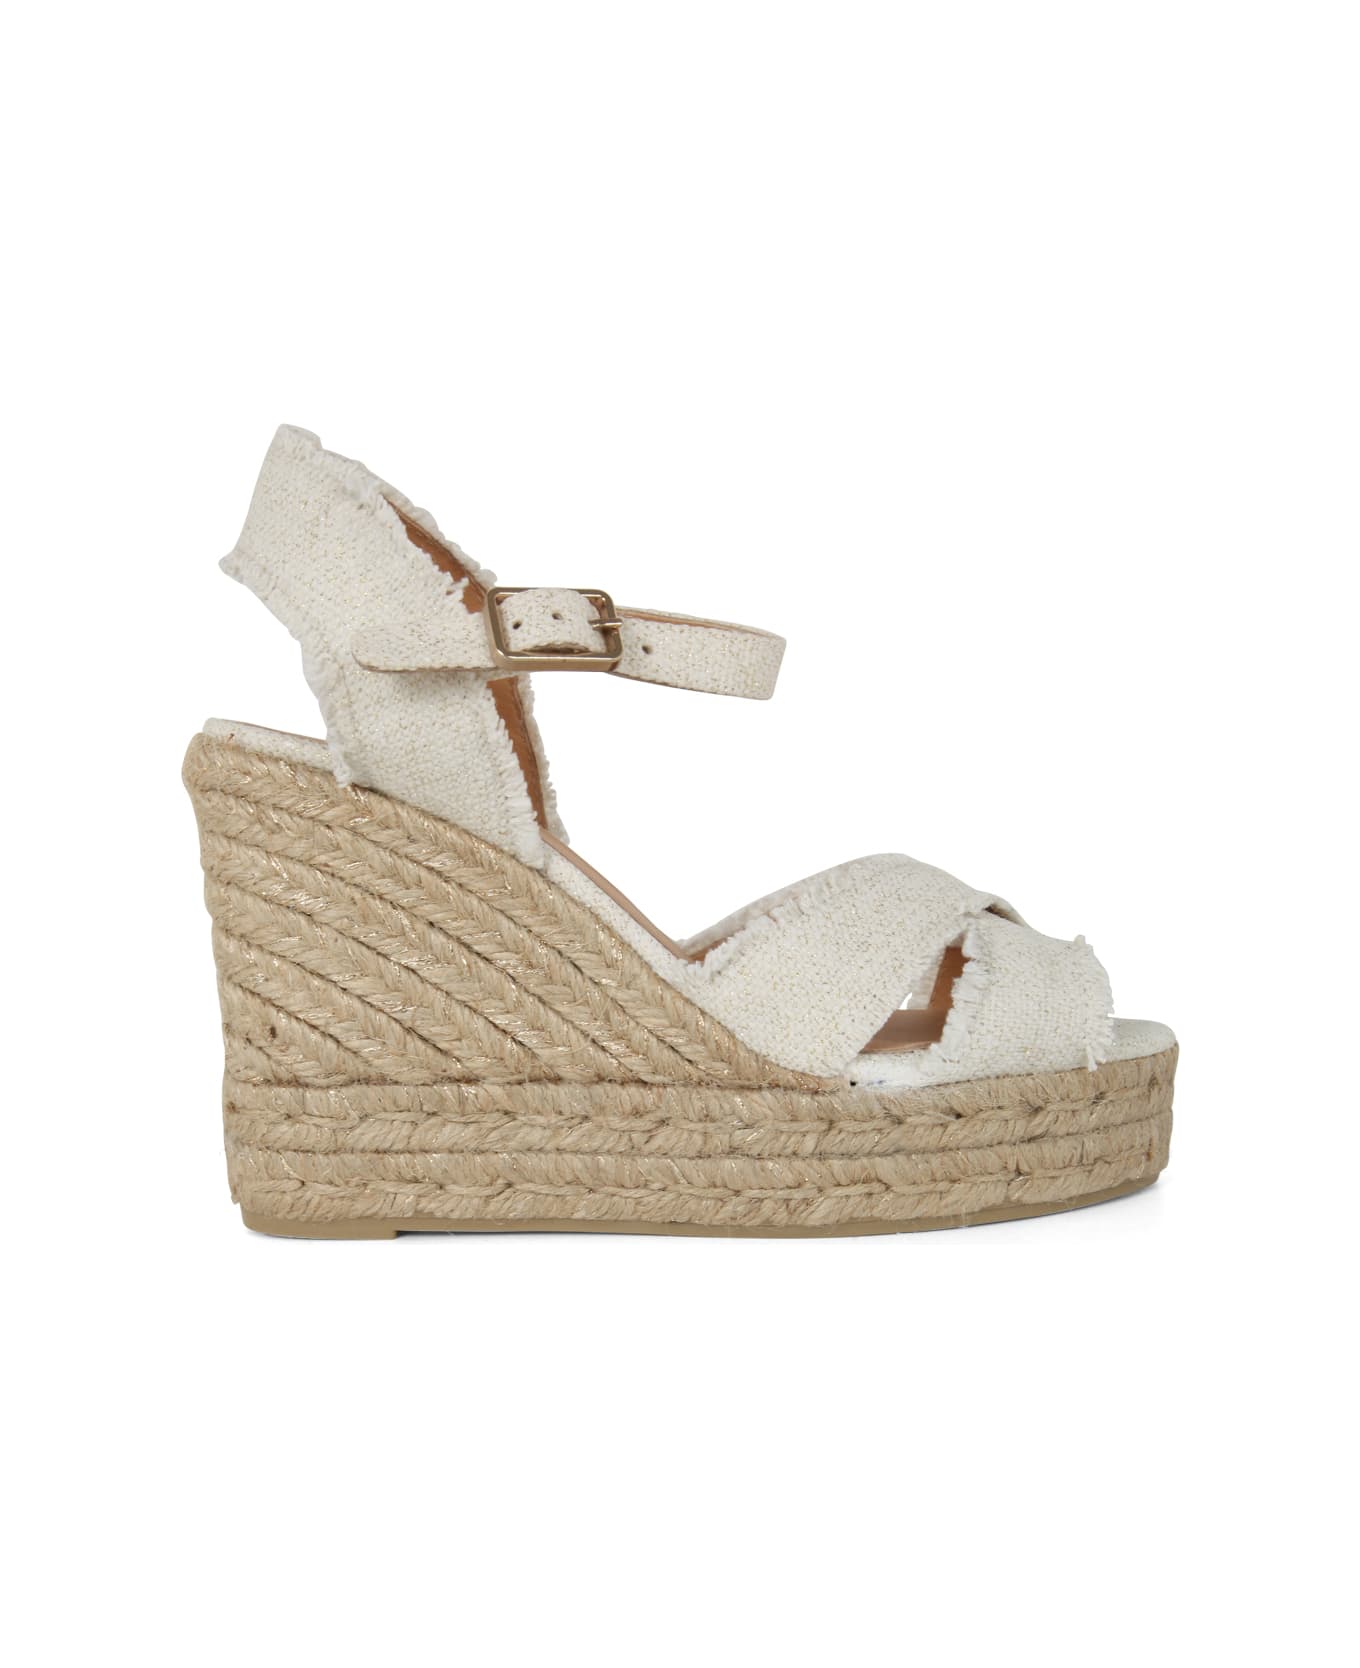 Castañer Bromelia Espadrilles With Belt On Ankles And Fringed Ankles - White Gold サンダル